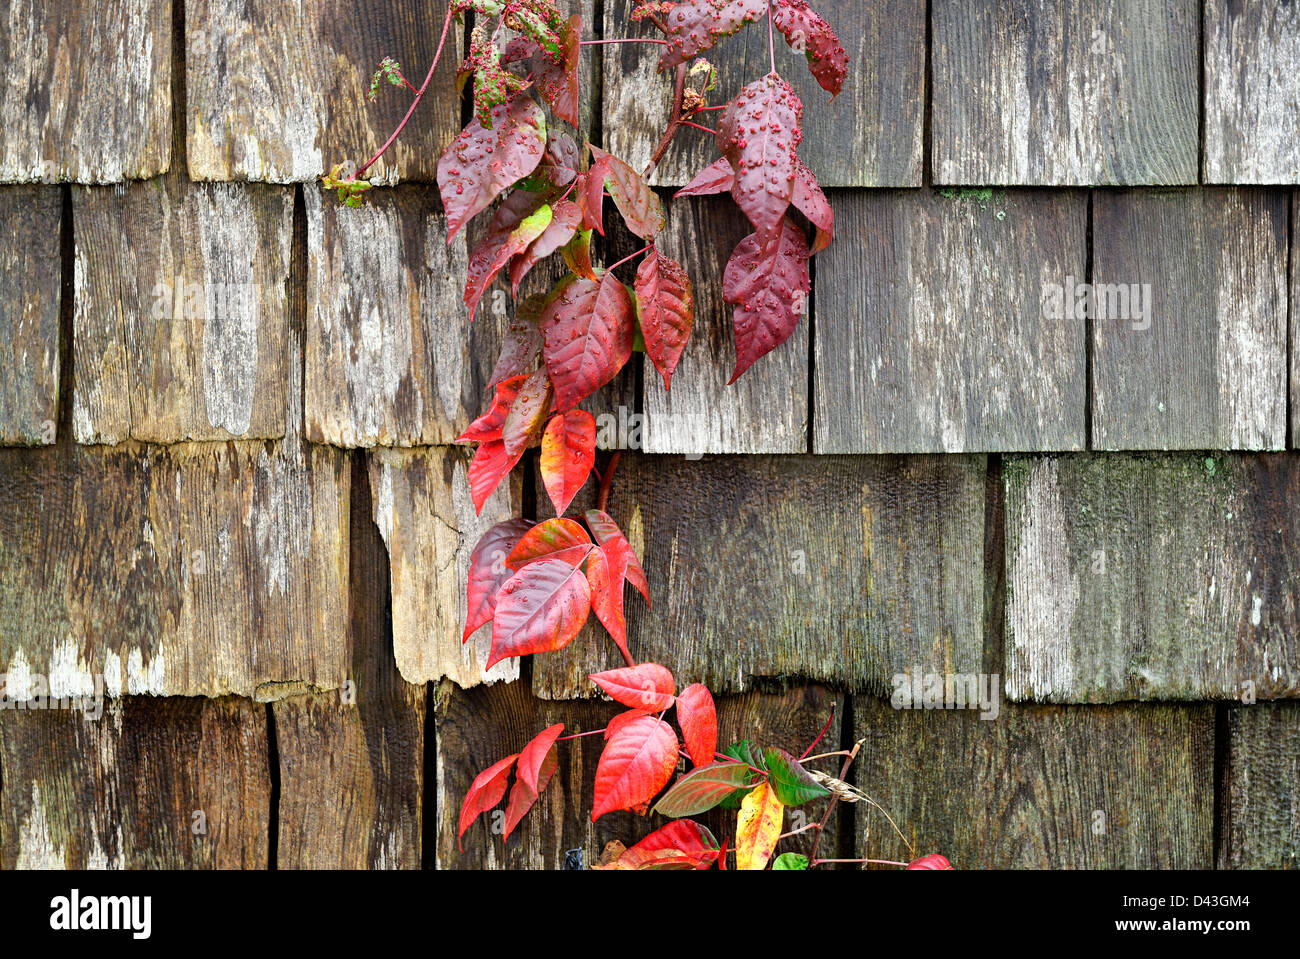 Poison ivy, Toxicodendron radicans, a poisonous plant growing on the side of a house, Stock Photo